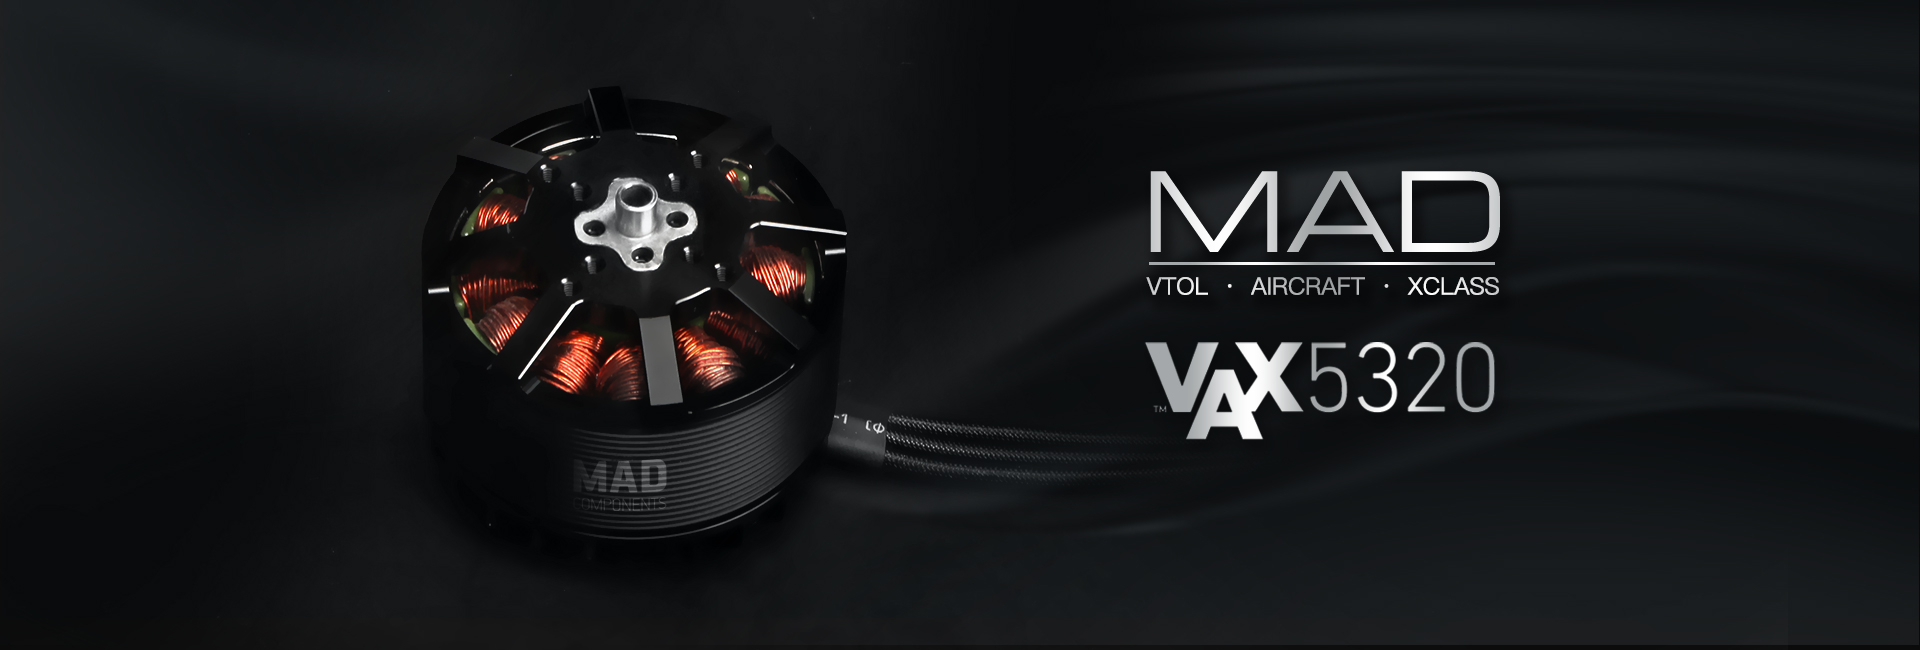 MAD VAX 5320 is designed for VTOL,AIRCRAFT,XCLASS to carry of 8-10 kg, supports 12S voltage.